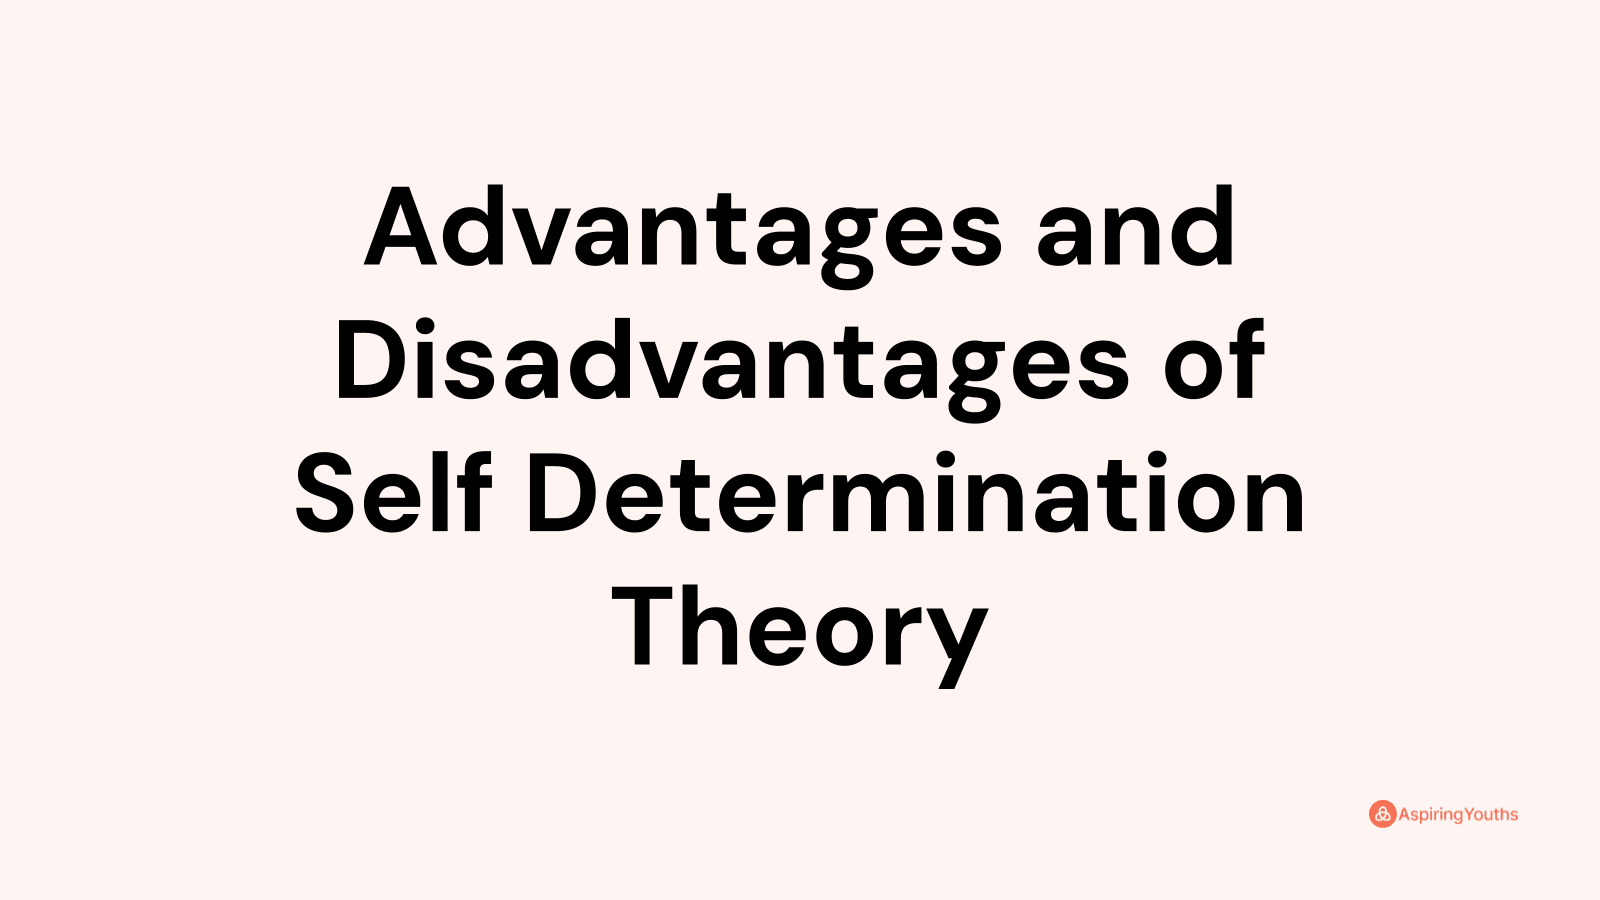 Advantages and disadvantages of Self Determination Theory